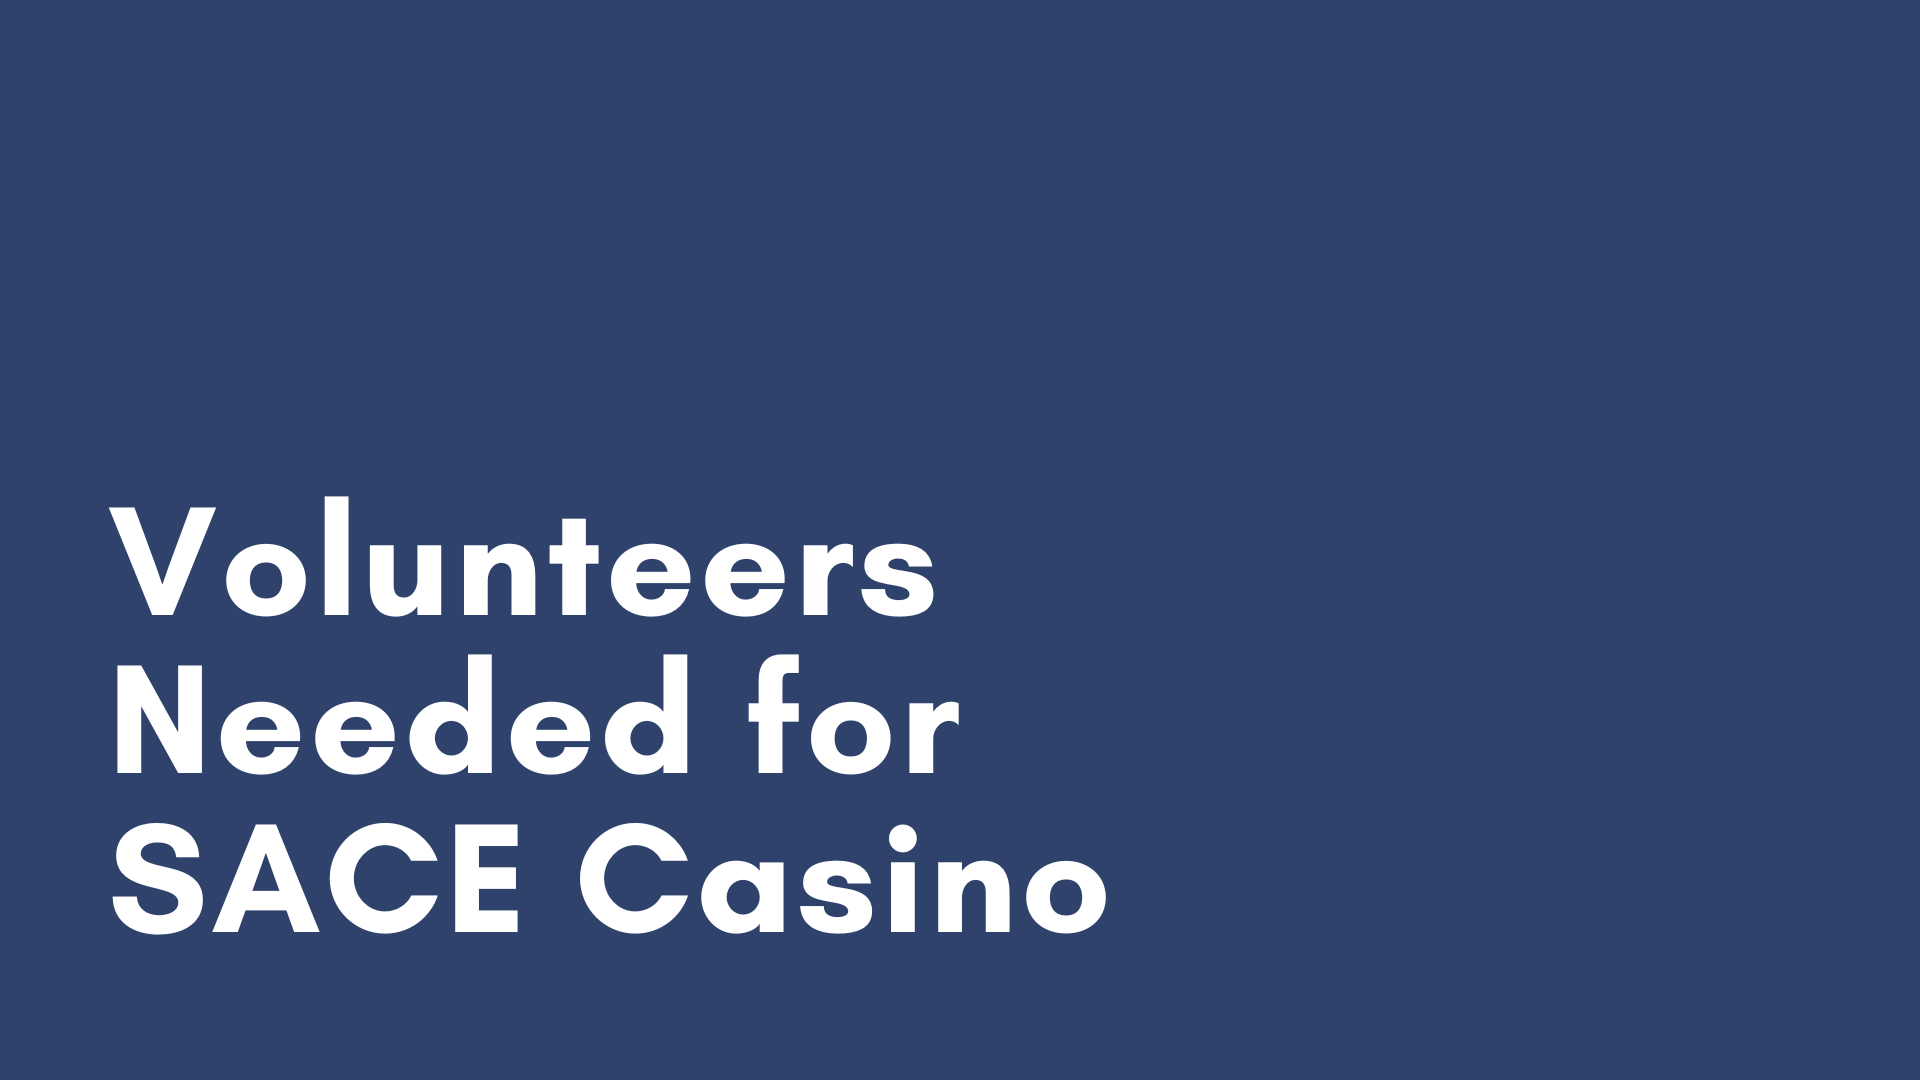 Dark background with white text that reads "Volunteers Needed for SACE Casino"